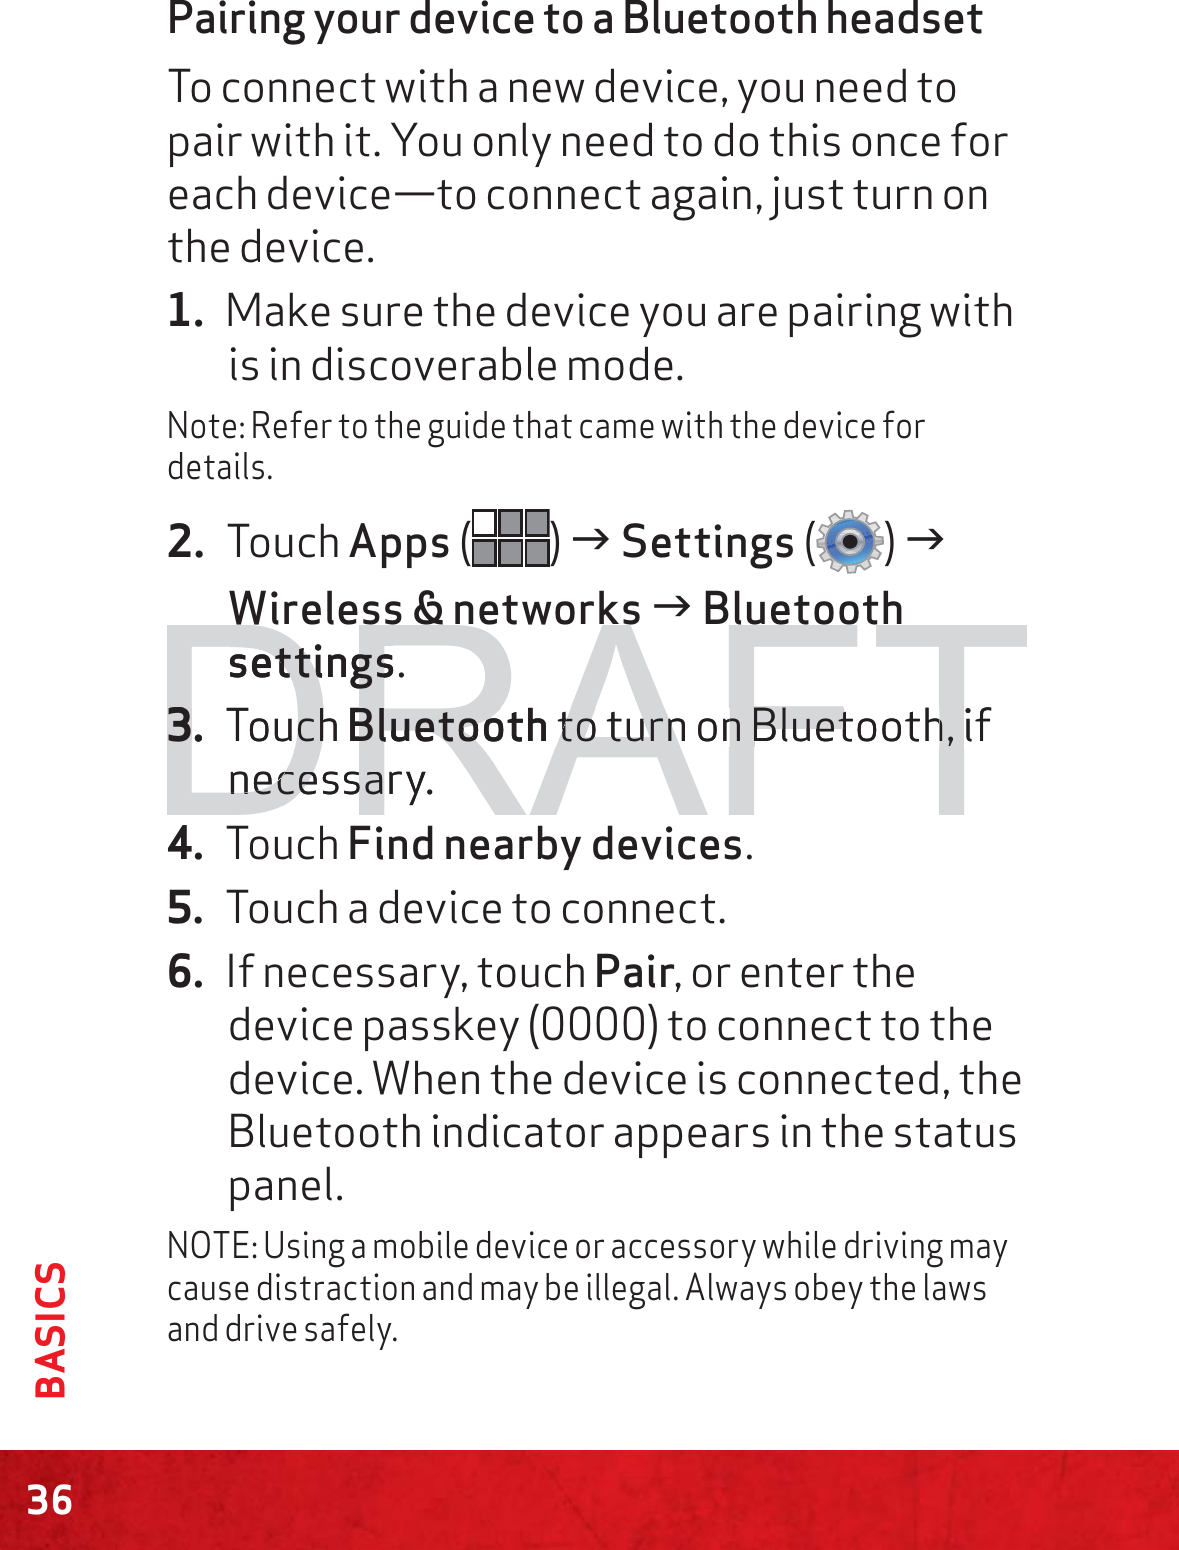 36BASICSPairing your device to a Bluetooth headsetTo connect with a new device, you need to pair with it. You only need to do this once for each device—to connect again, just turn on the device.1. Make sure the device you are pairing with is in discoverable mode.Note: Refer to the guide that came with the device for details.2. Touch Apps () J Settings () J Wireless &amp; networks J Bluetooth settings.3. Touch Bluetooth to turn on Bluetooth, if necessary.4. Touch Find nearby devices.5. Touch a device to connect.6. If necessary, touch Pair, or enter the device passkey (0000) to connect to the device. When the device is connected, the Bluetooth indicator appears in the status panel.NOTE: Using a mobile device or accessory while driving may cause distraction and may be illegal. Always obey the laws and drive safely.DRAFTsettingssettings.3.3TouchchBluetoothBluetoo to turn on Bluetooth, if to turn on Bluetooth, necessary.necessa